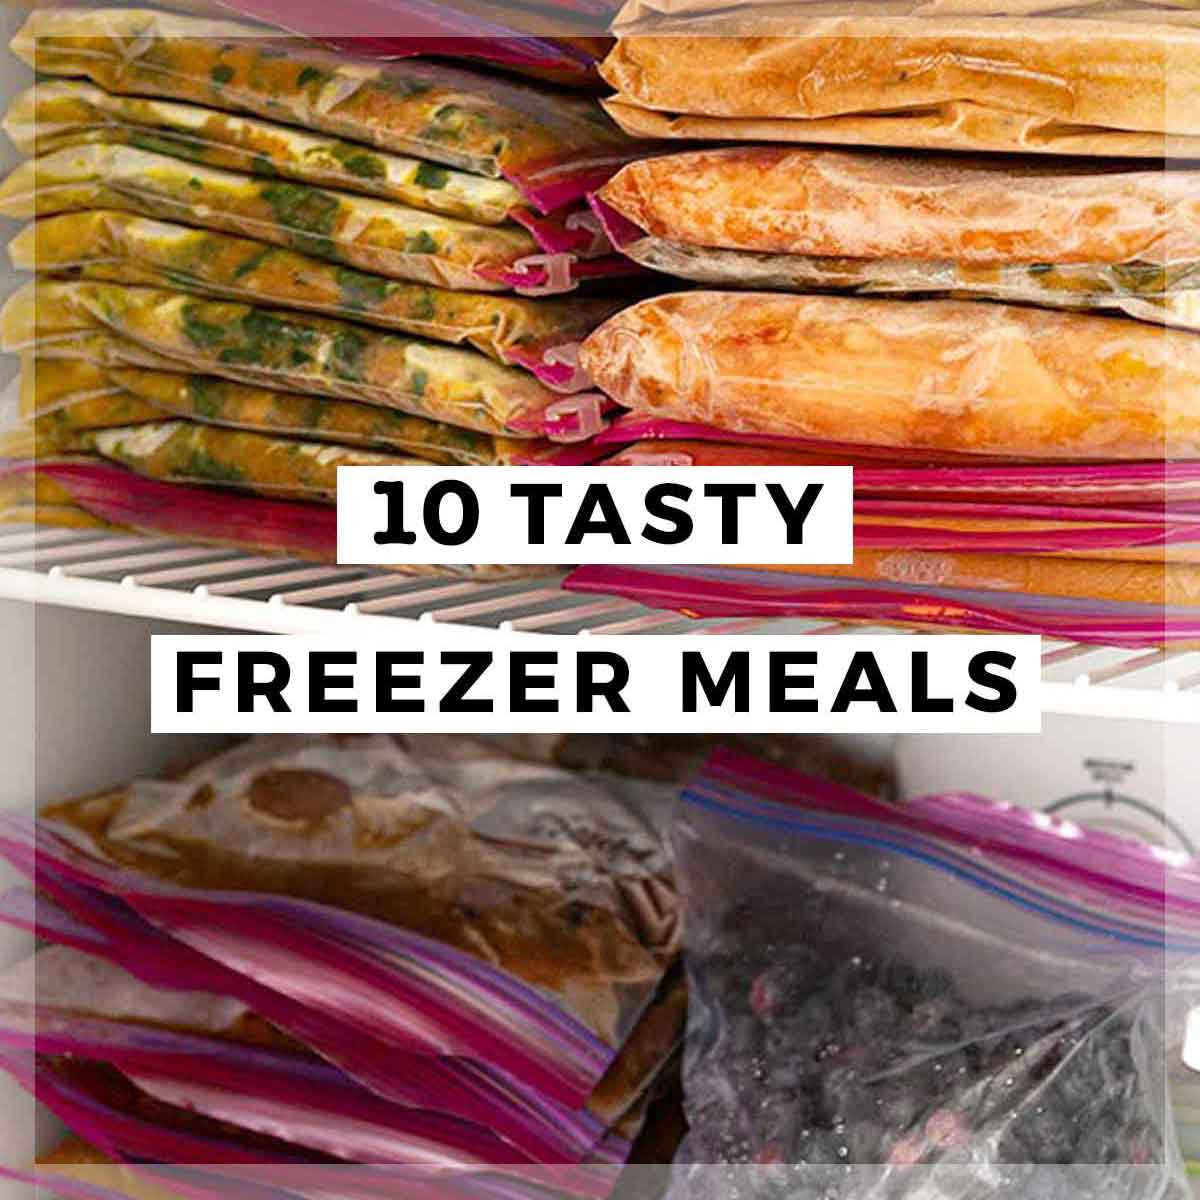 Freezer meals in a freezer with a title that says "10 Tasty Freezer Meals."